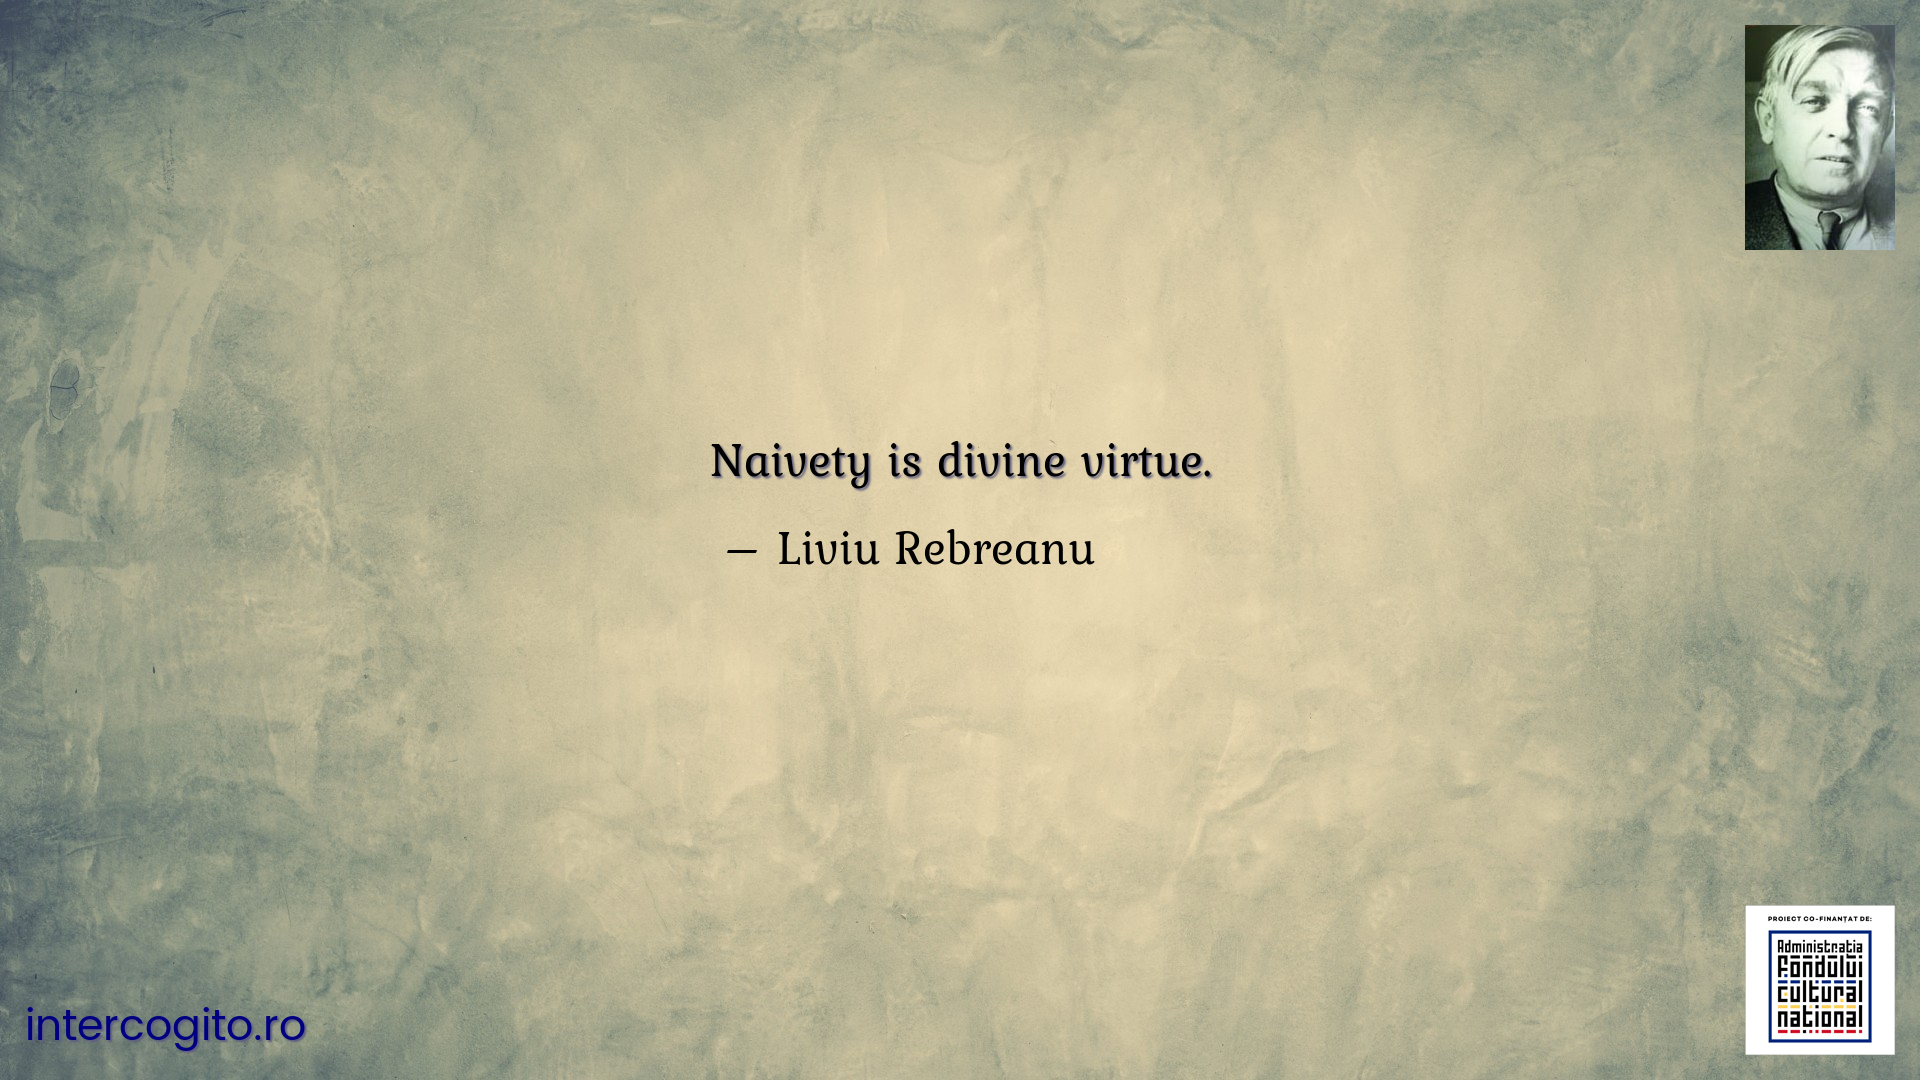 Naivety is divine virtue.